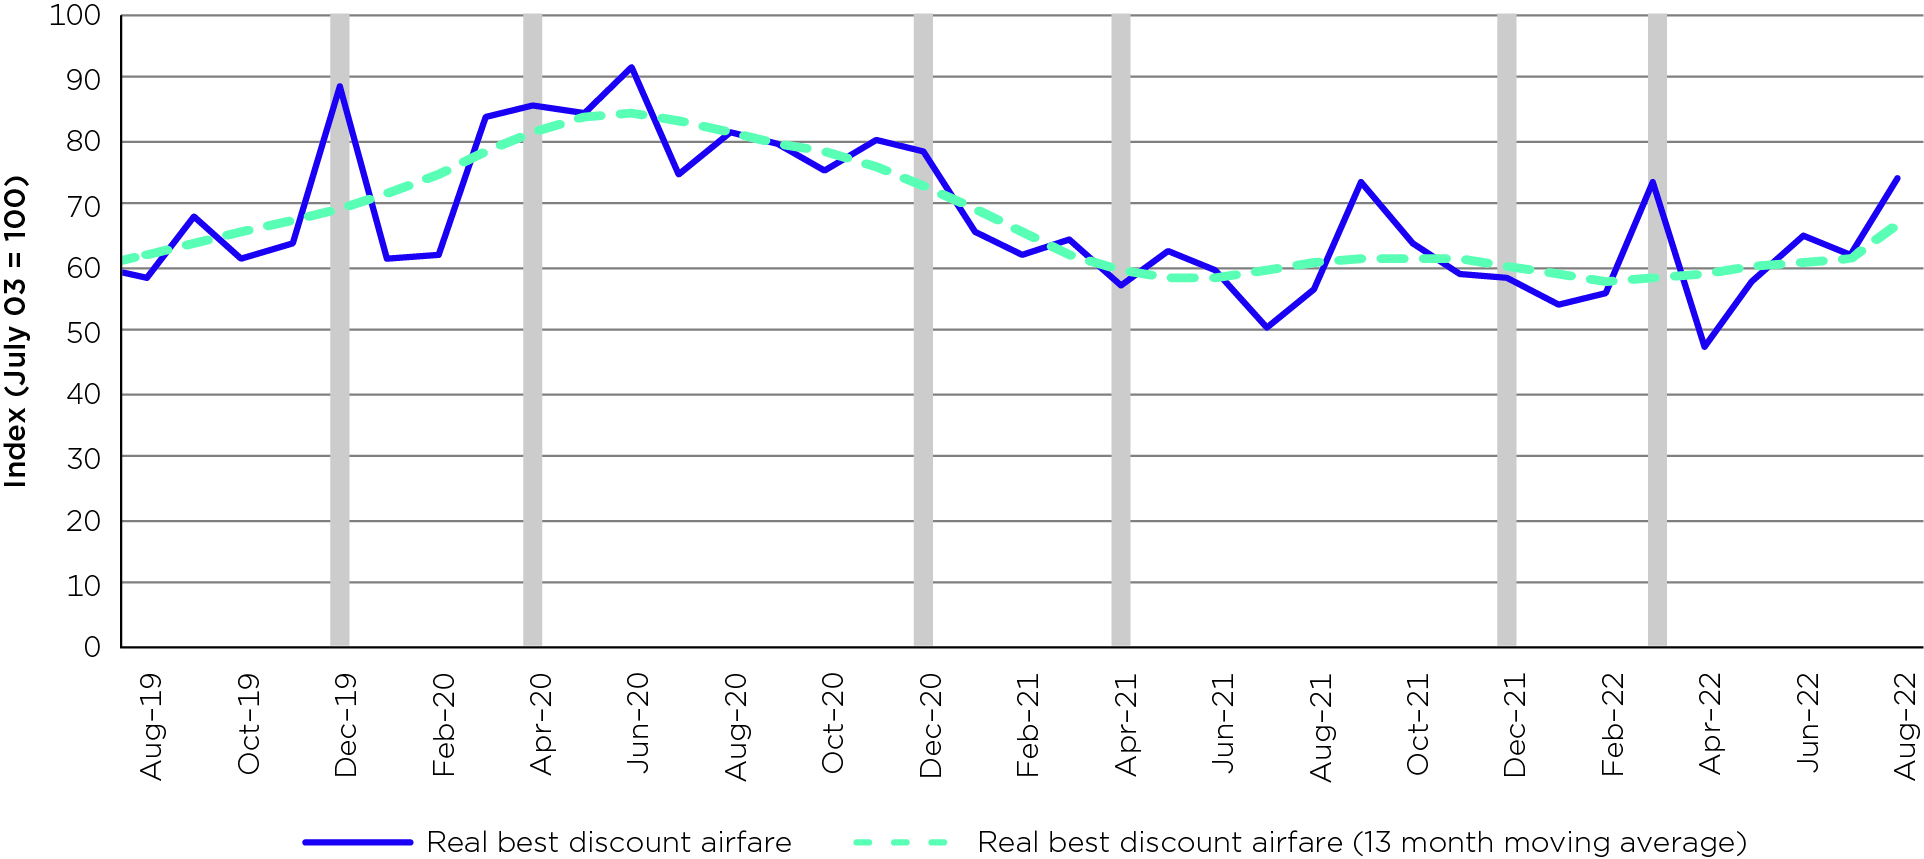 Average discount economy airfares on domestic flights increased significantly between April and August 2022